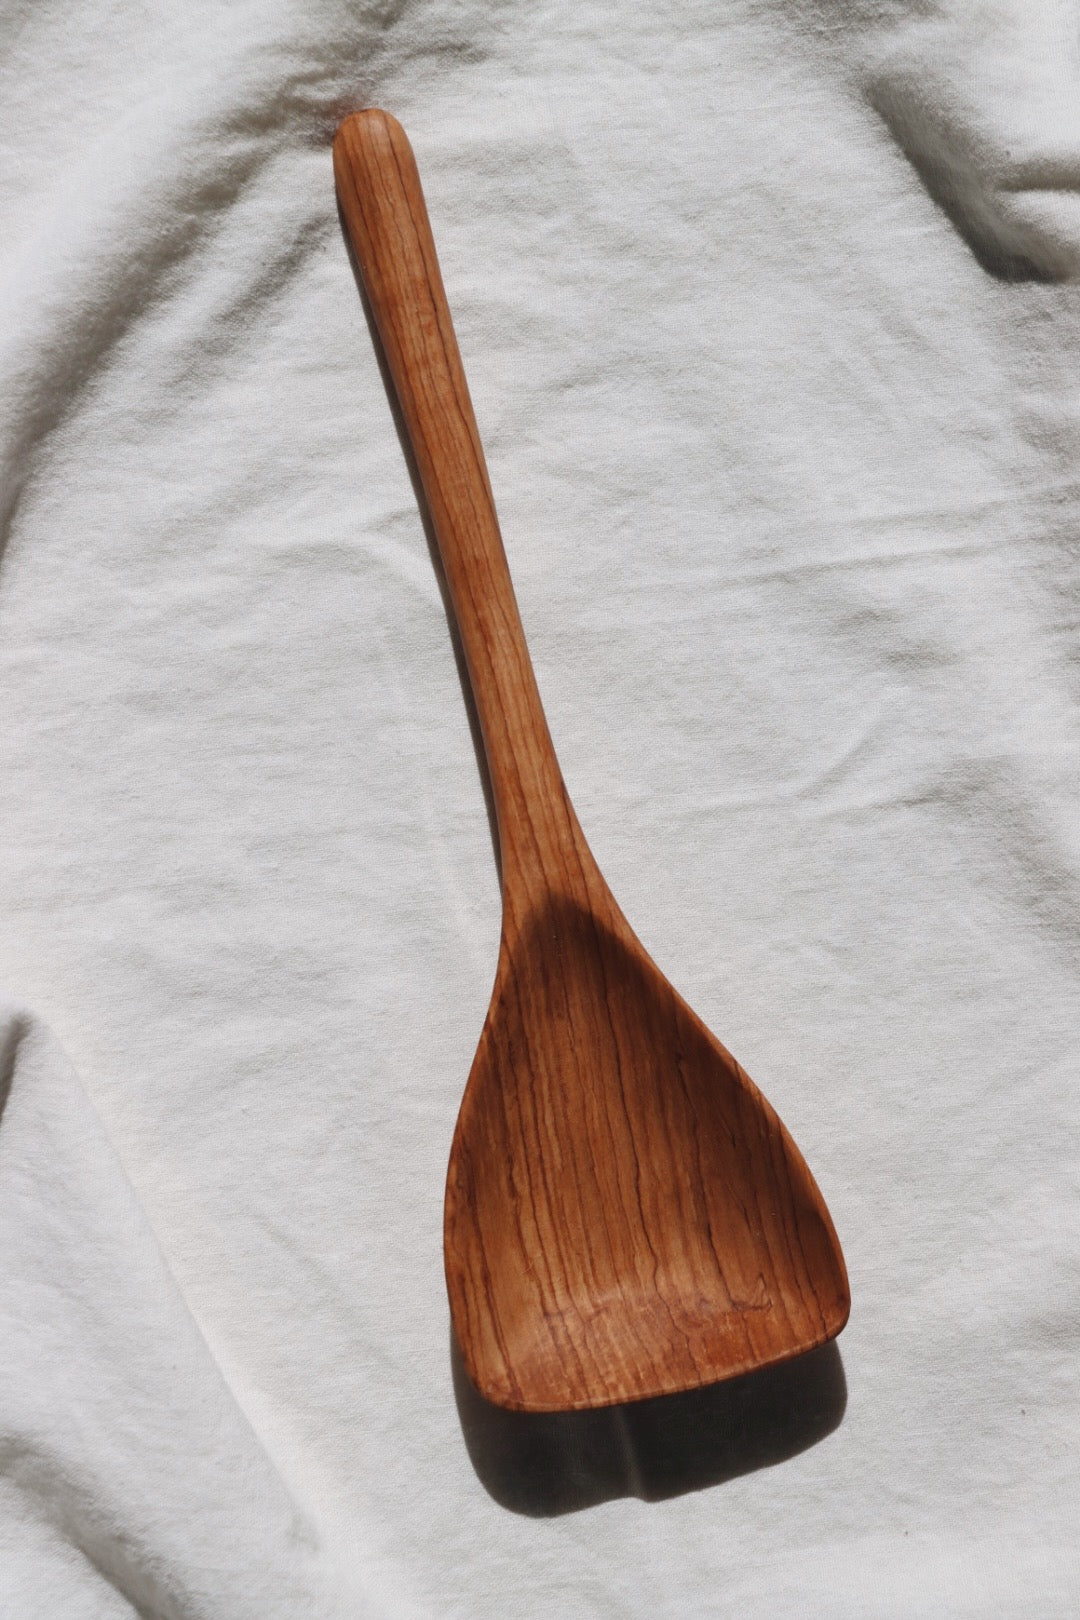 Olivewood Squared Spoon